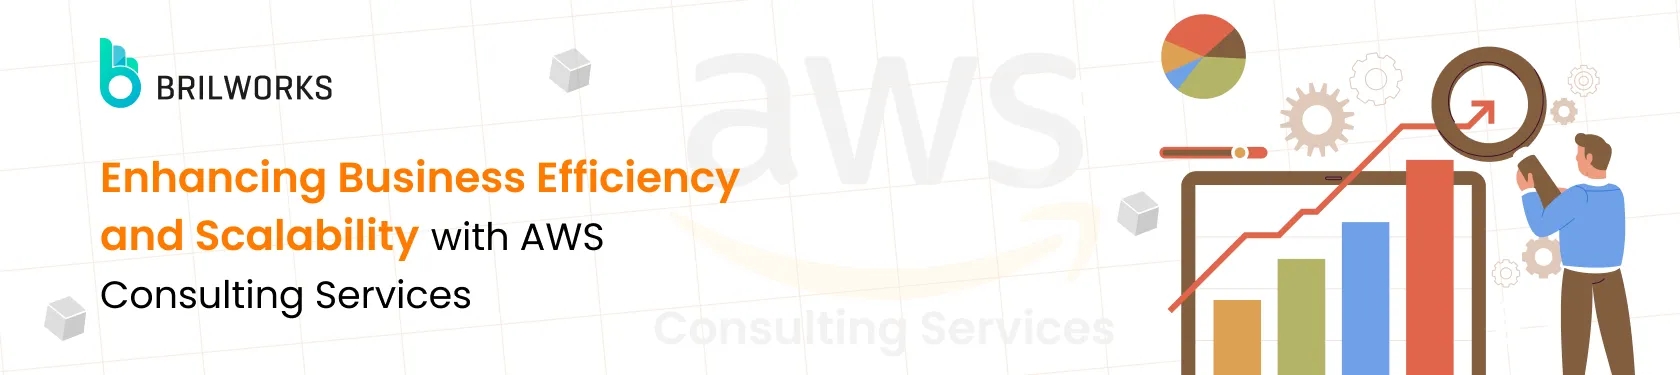 How-AWS-Consulting-Services-help-improve-efficiency-and-scalability-banner-image